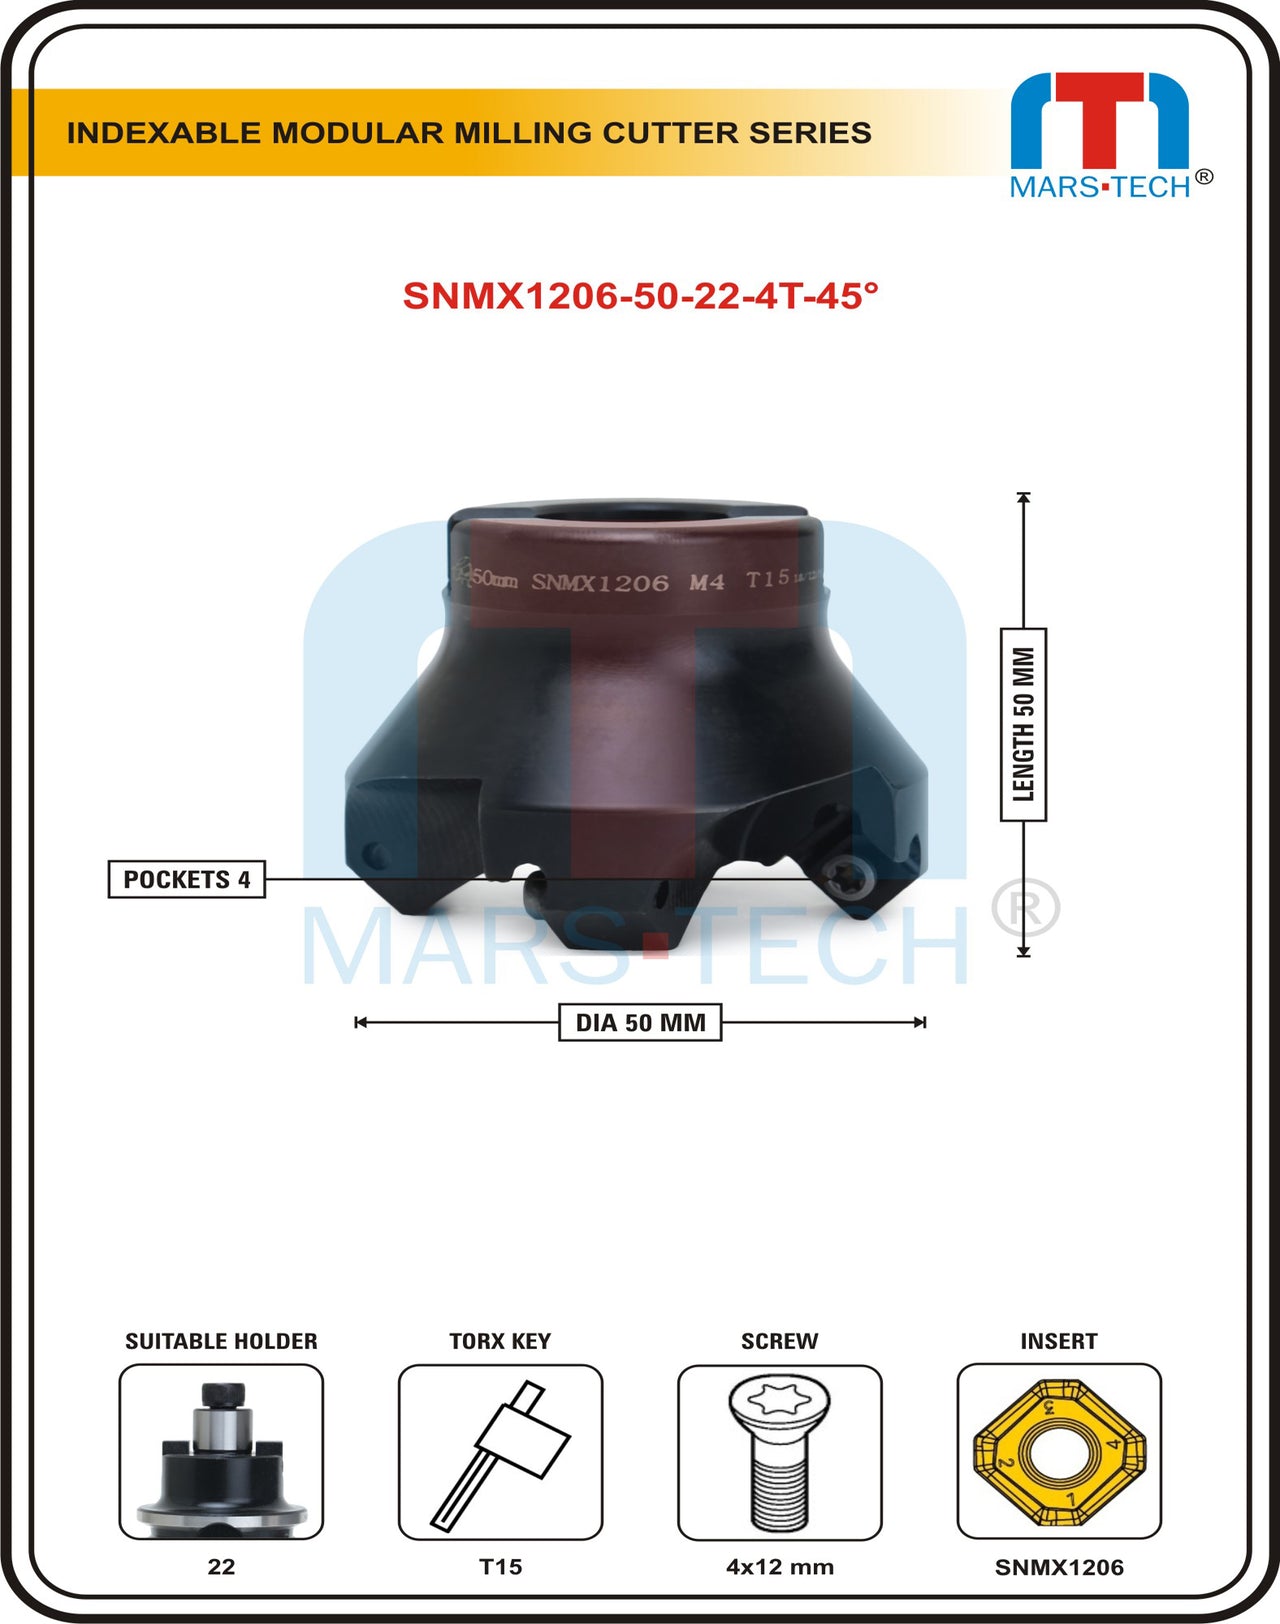 SNMX1206 insert facemill